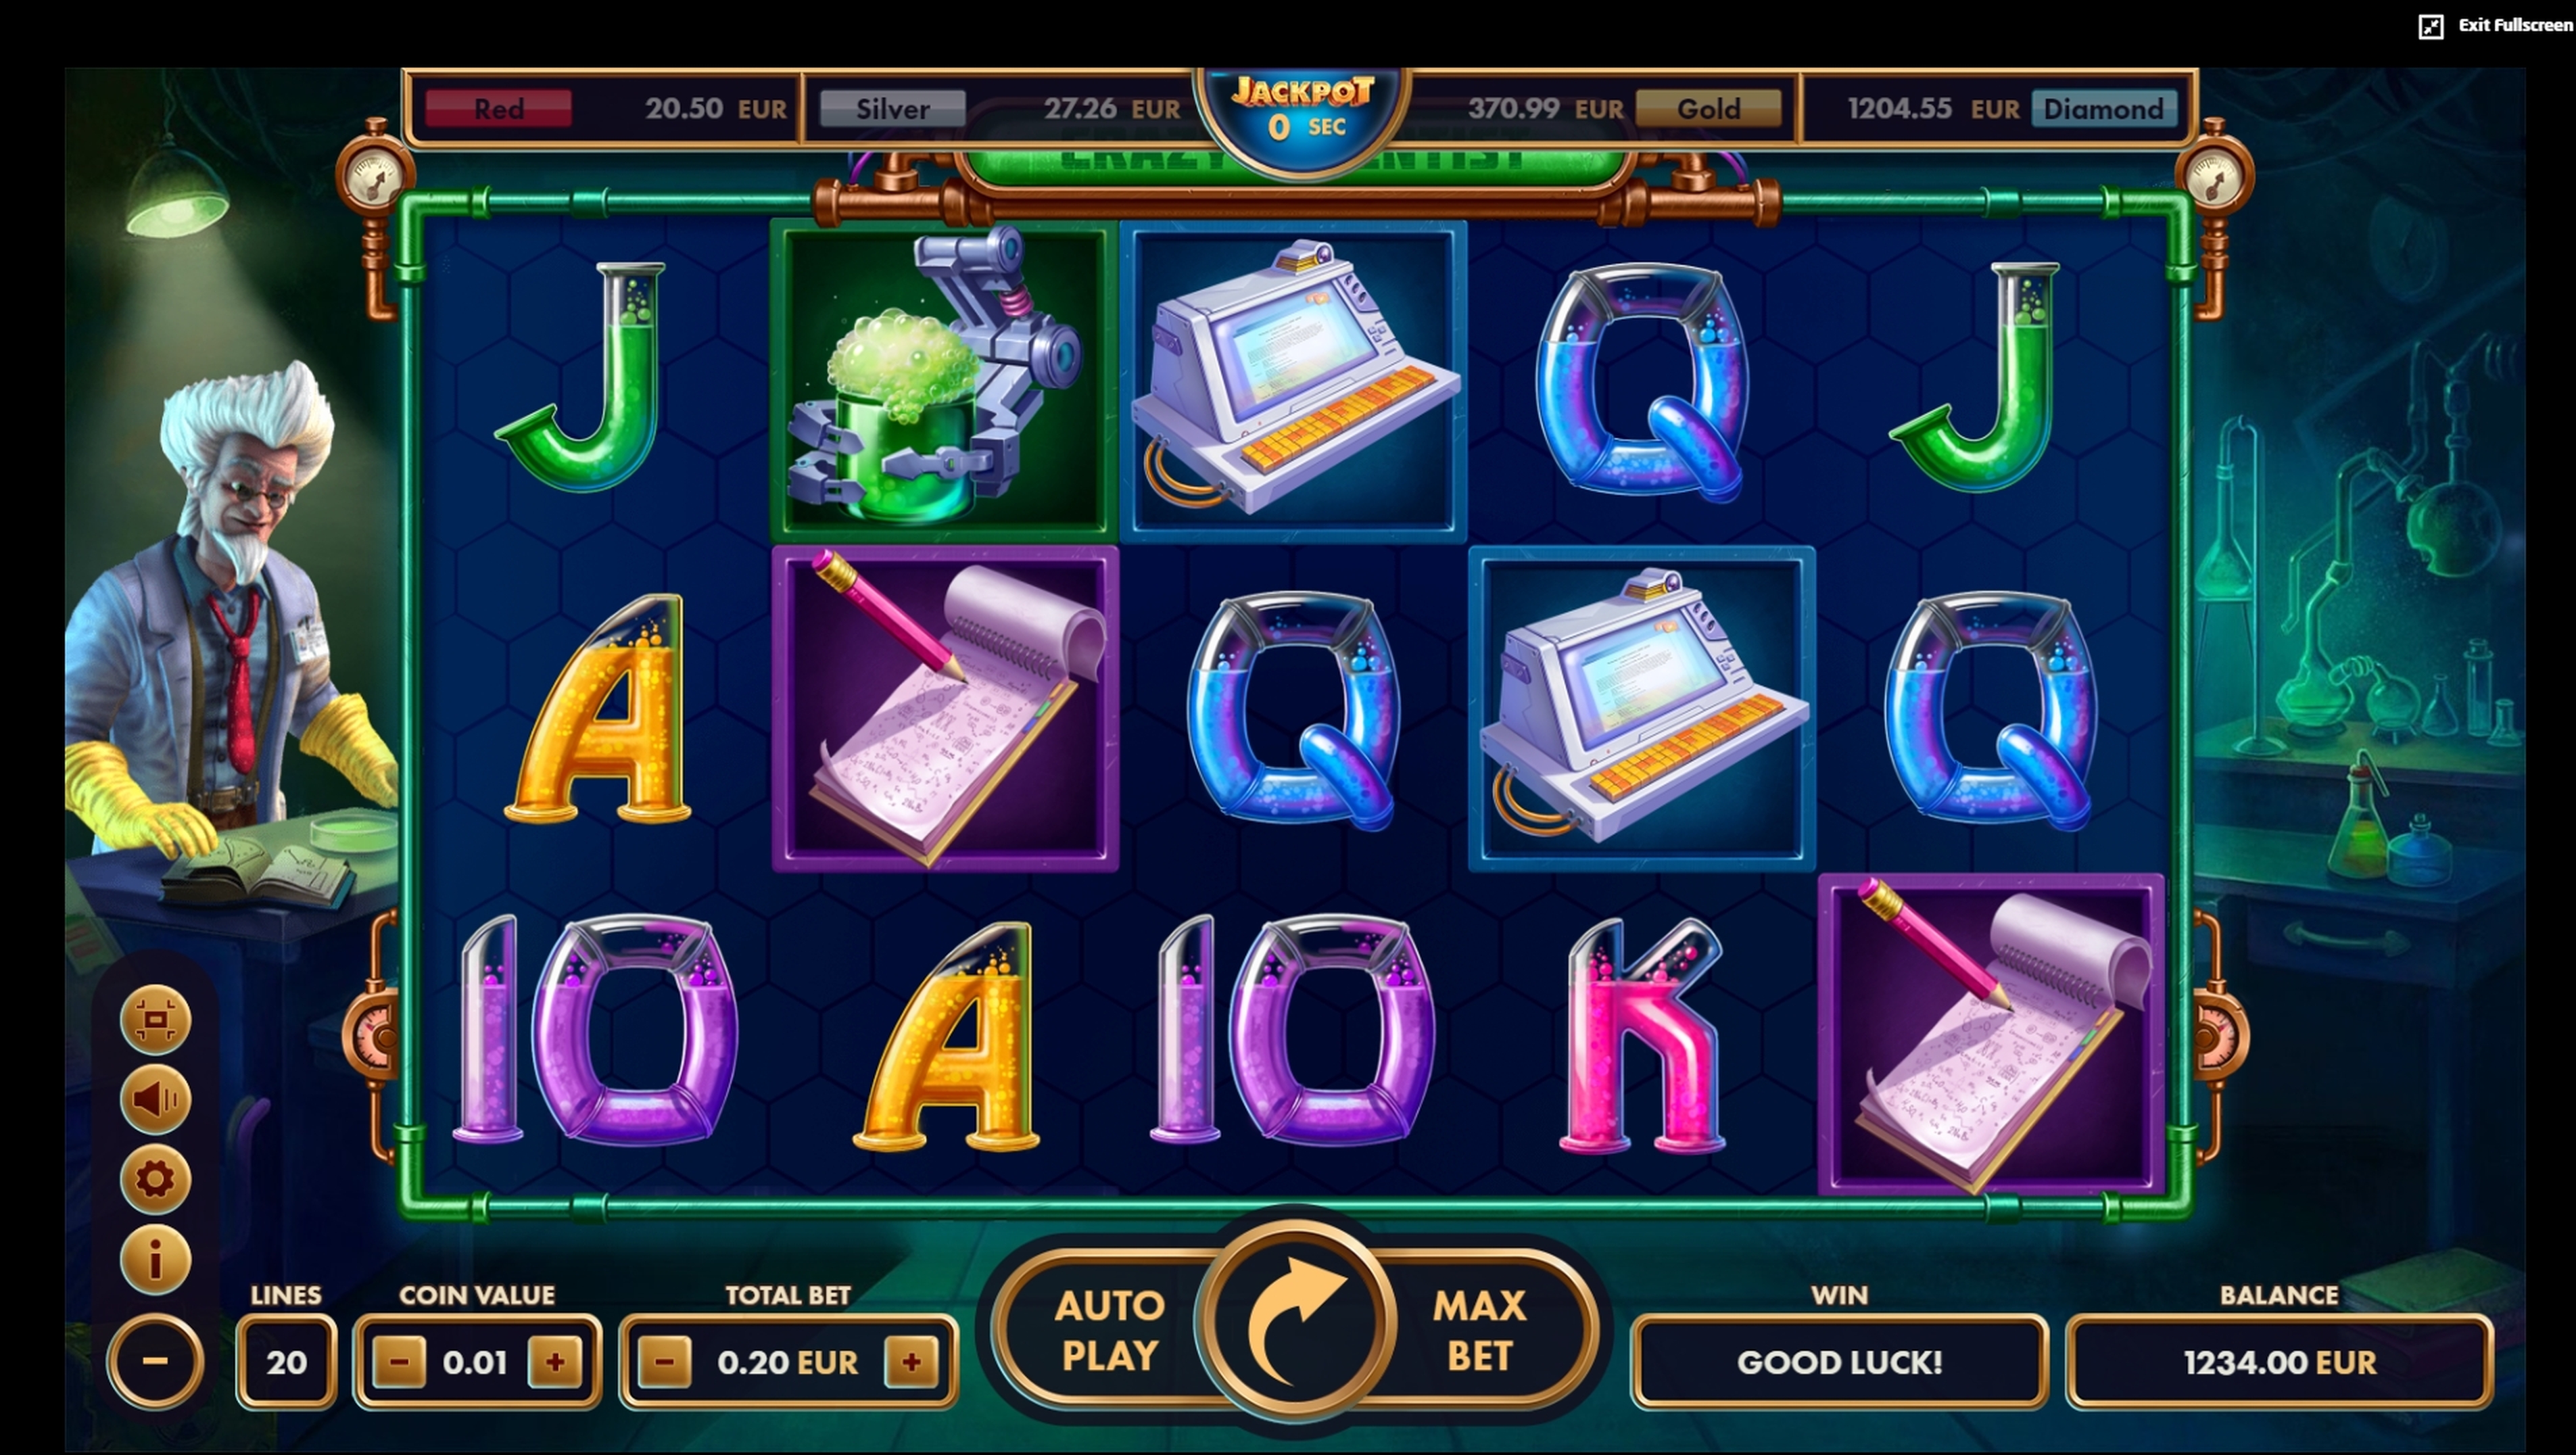 Pay By Mobile Casino Uk ️ Top 10 Pay By Phone Bill Online Casinos ️ - slots mobile top up